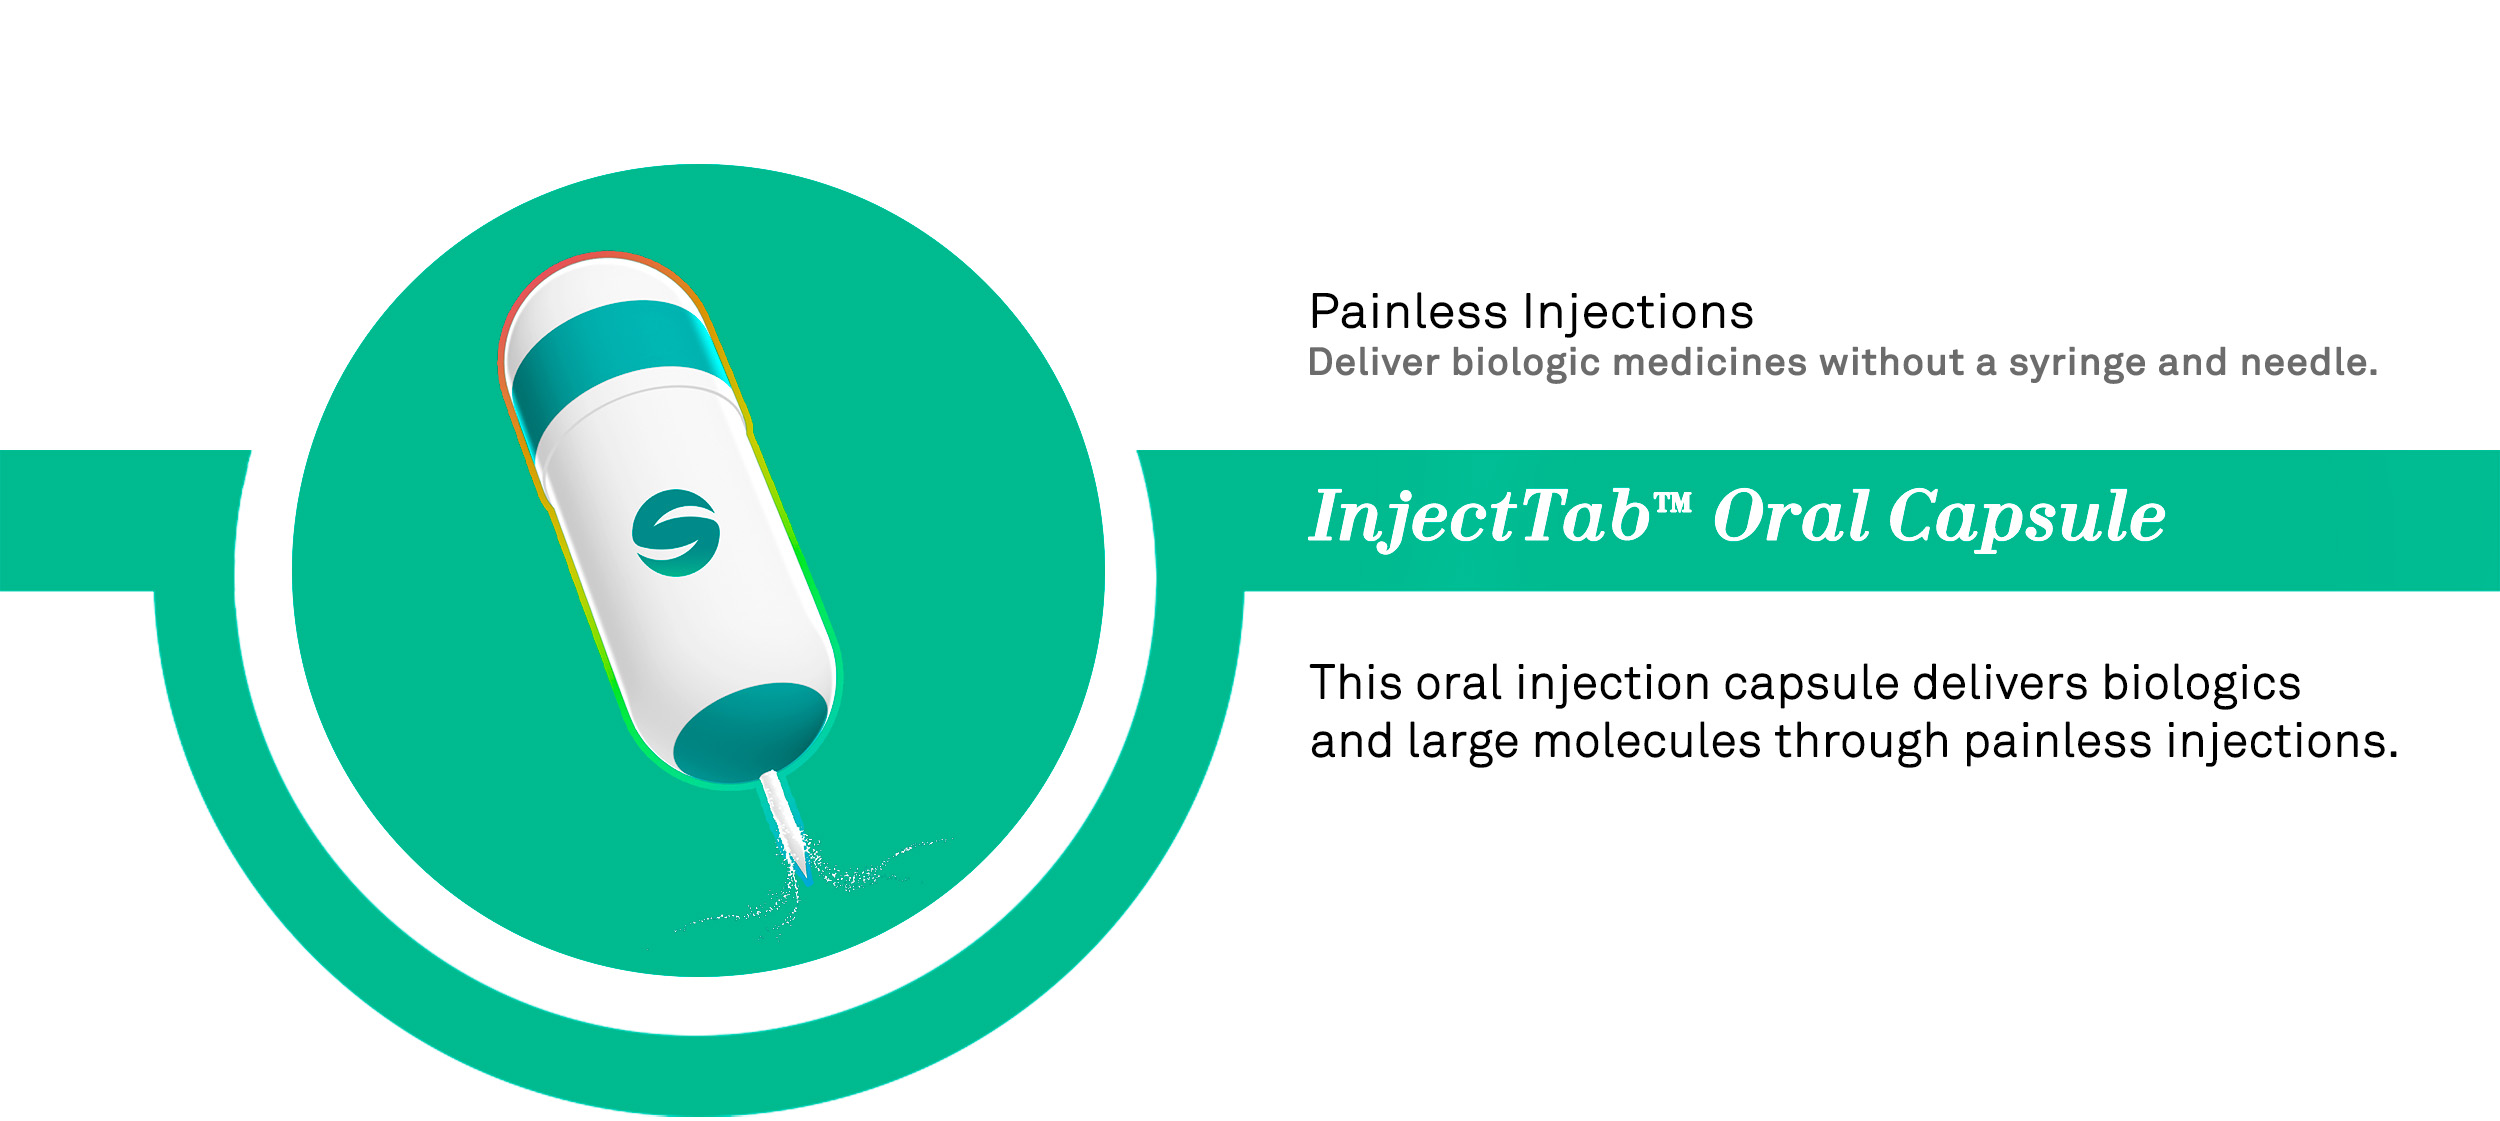 InjectTab Oral Capsule